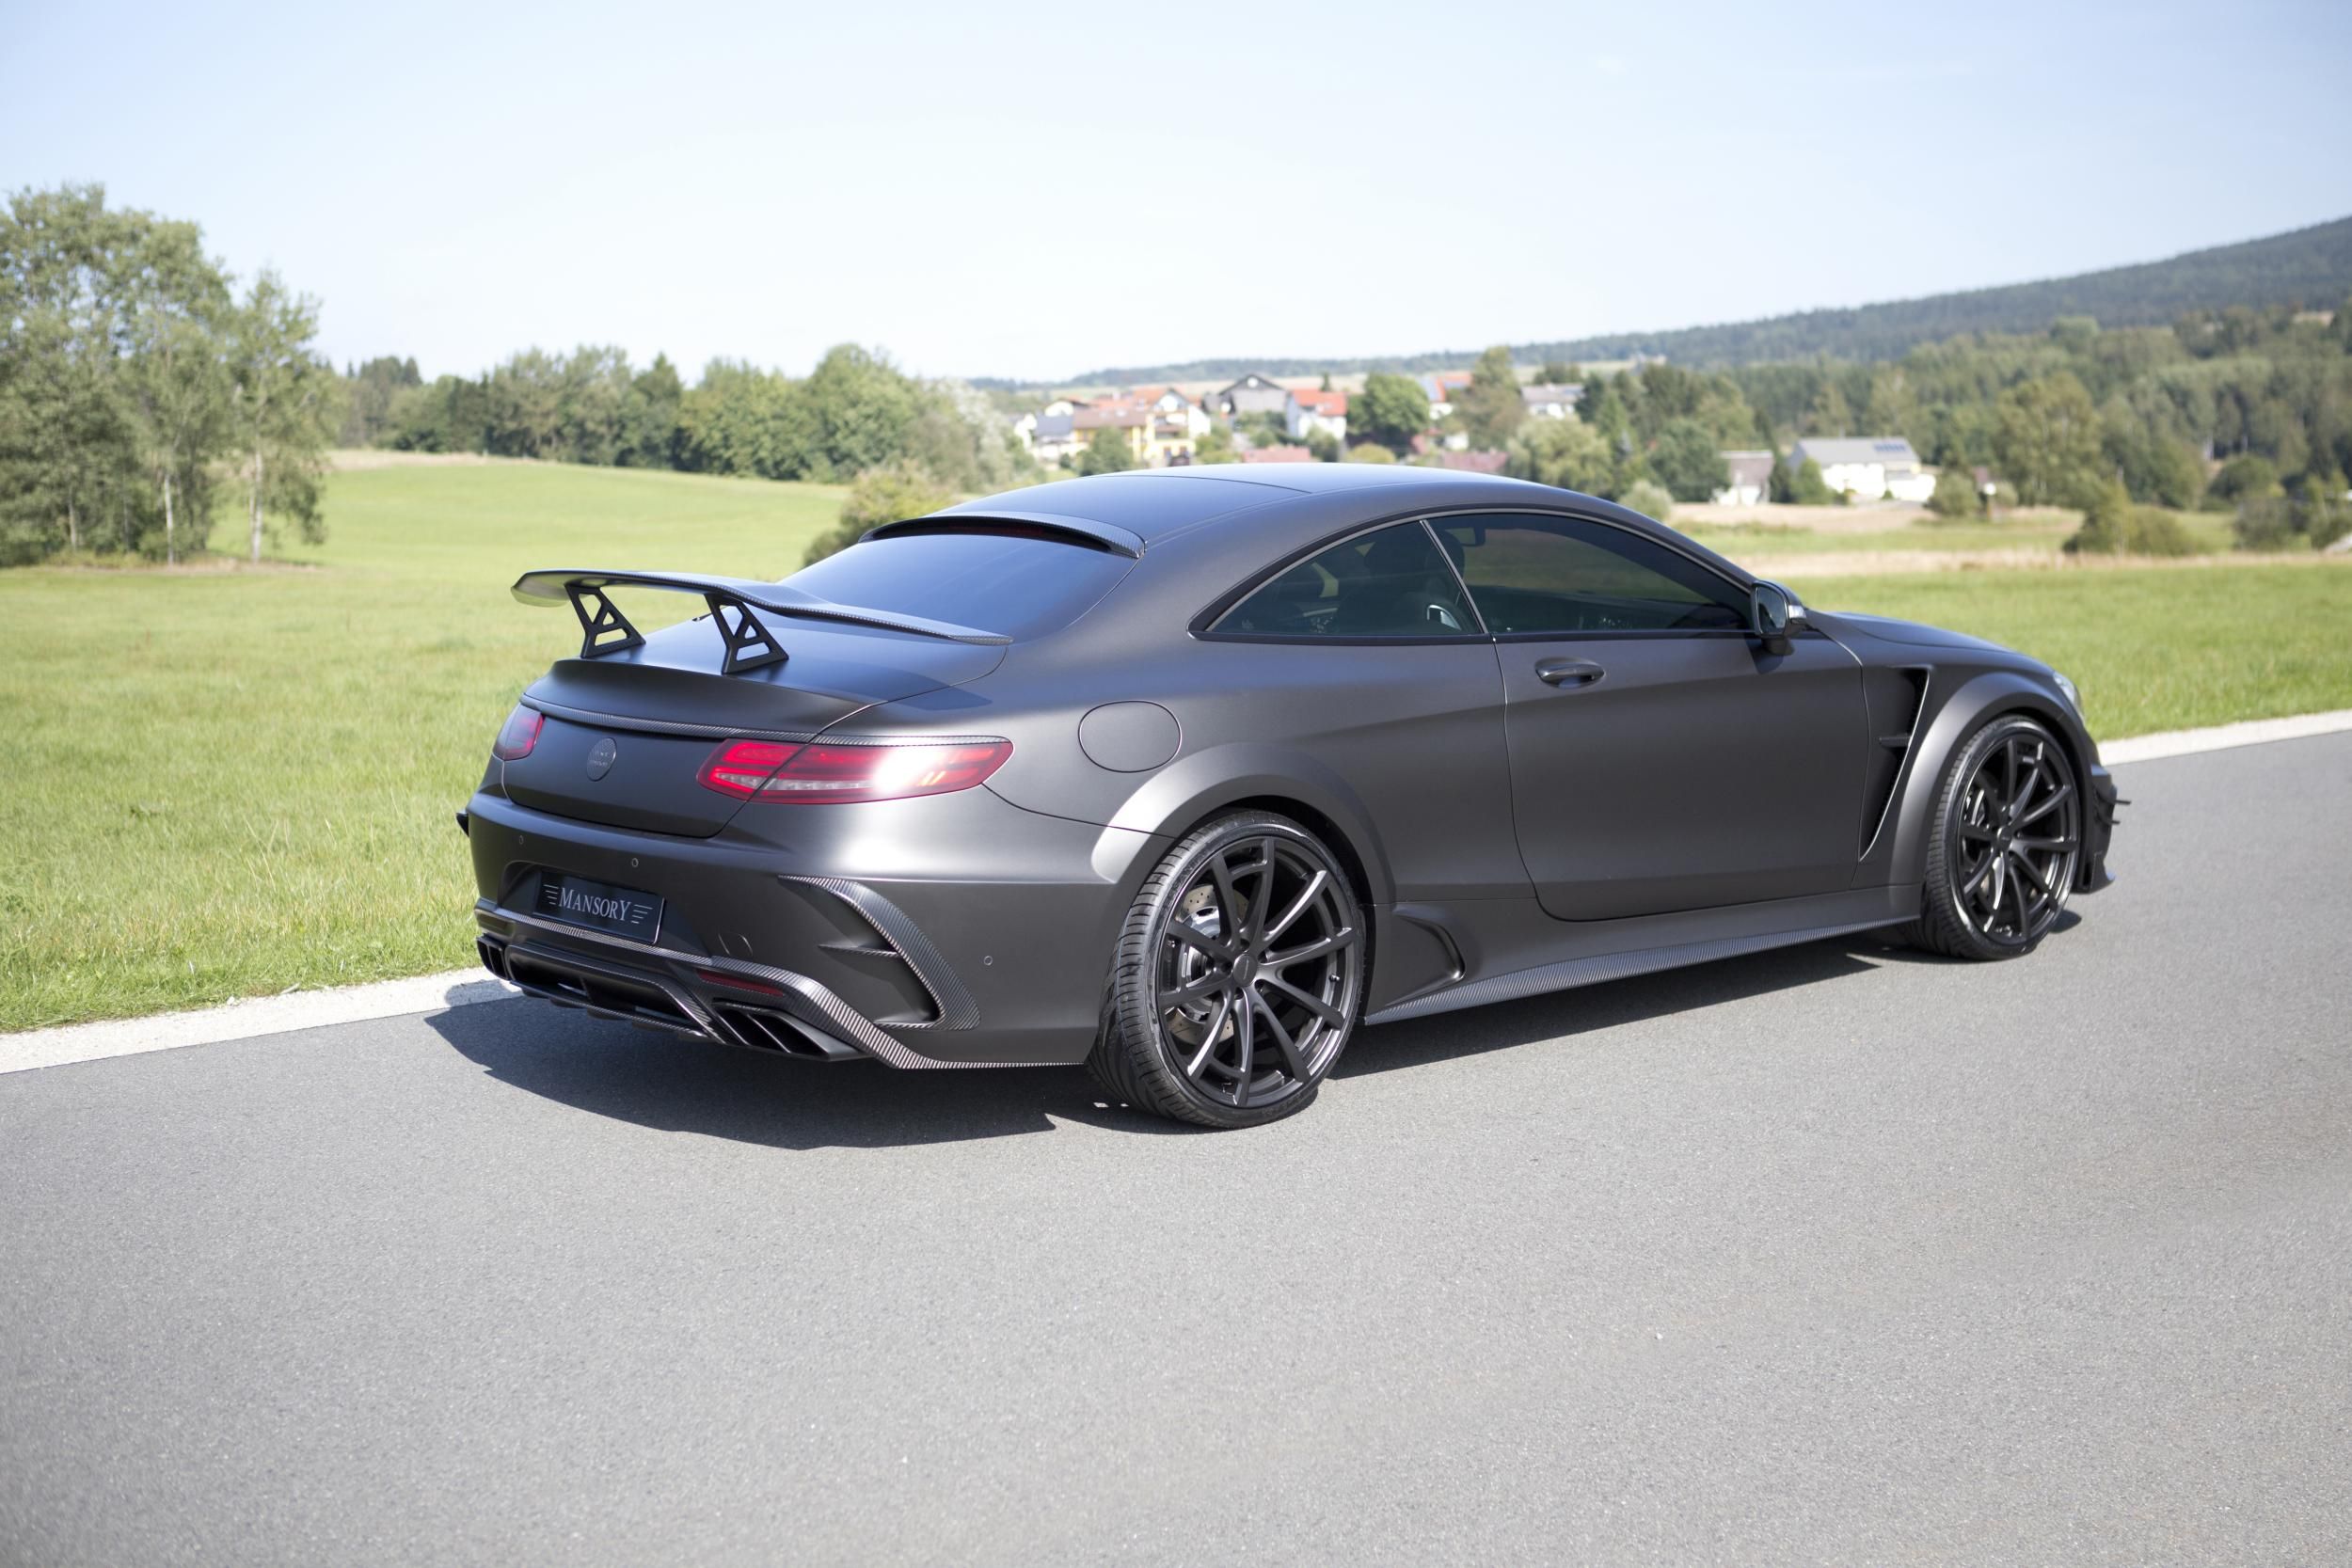 2016 Mercedes-AMG S63 Coupe Black Edition By Mansory